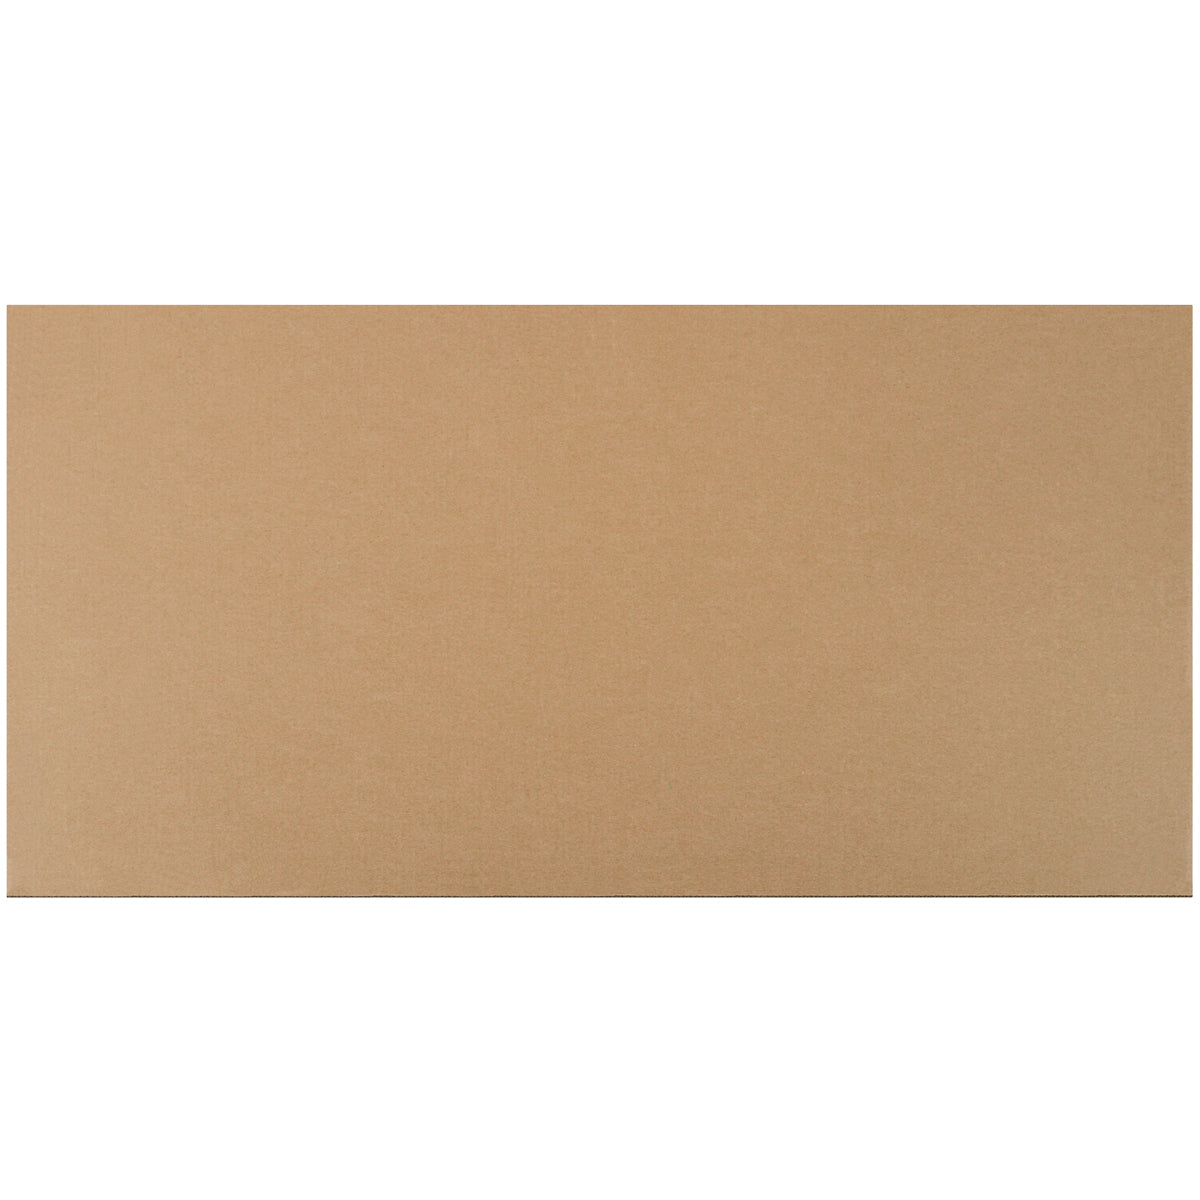 Partners Brand Corrugated Sheets, 48 x 96, White, Pack Of 5